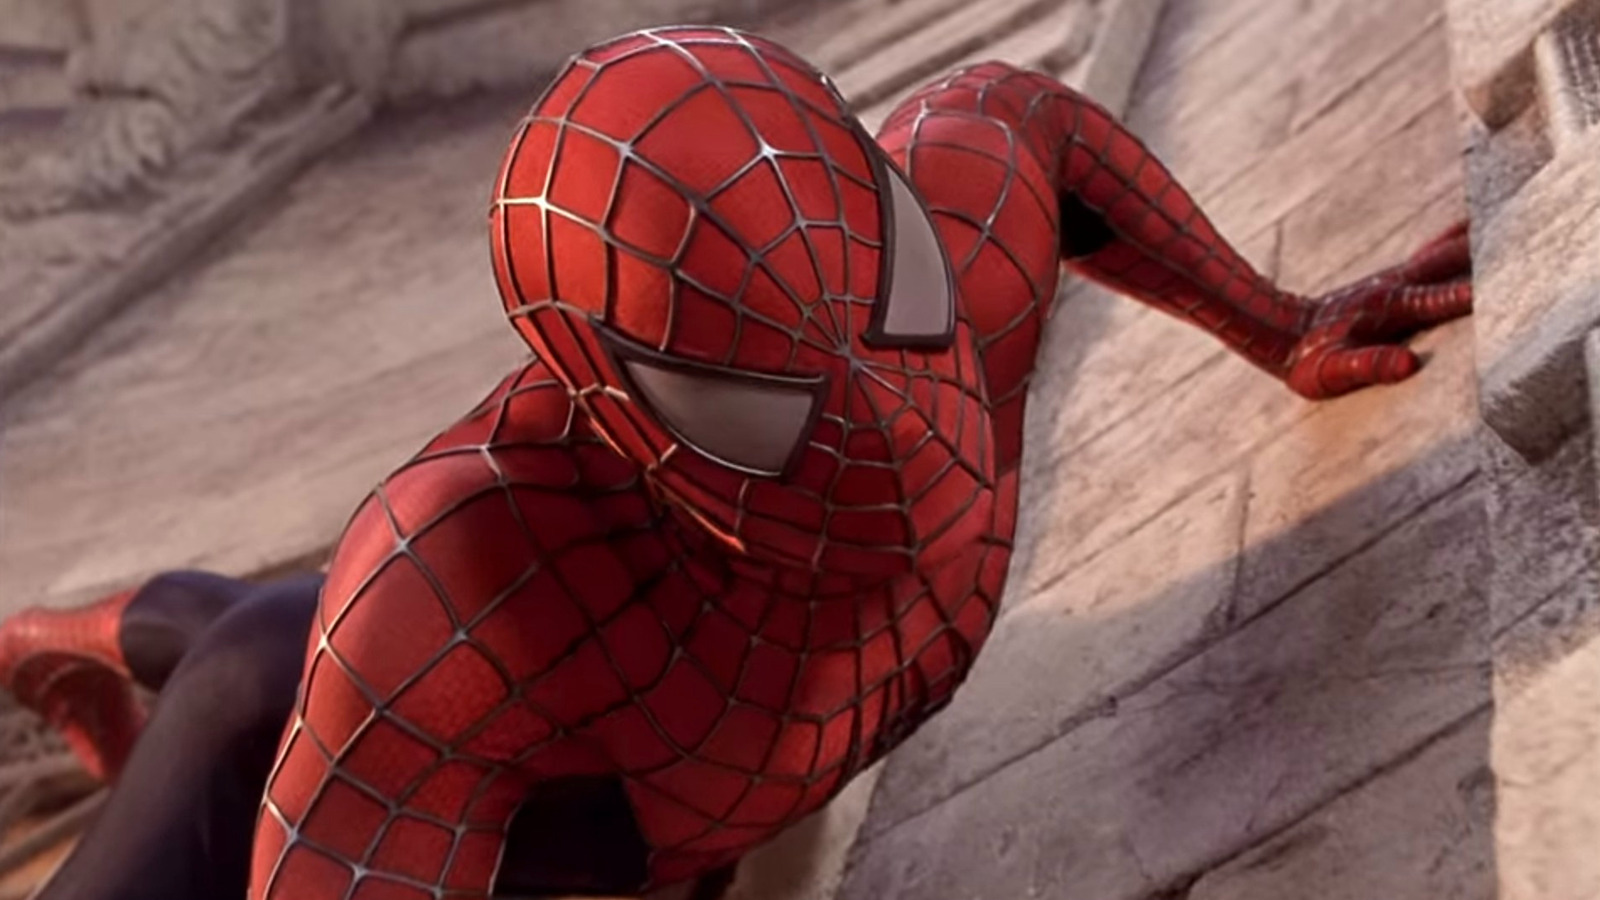 Kevin Feige's MCU Ambitions Started With Sam Raimi's Spider-Man